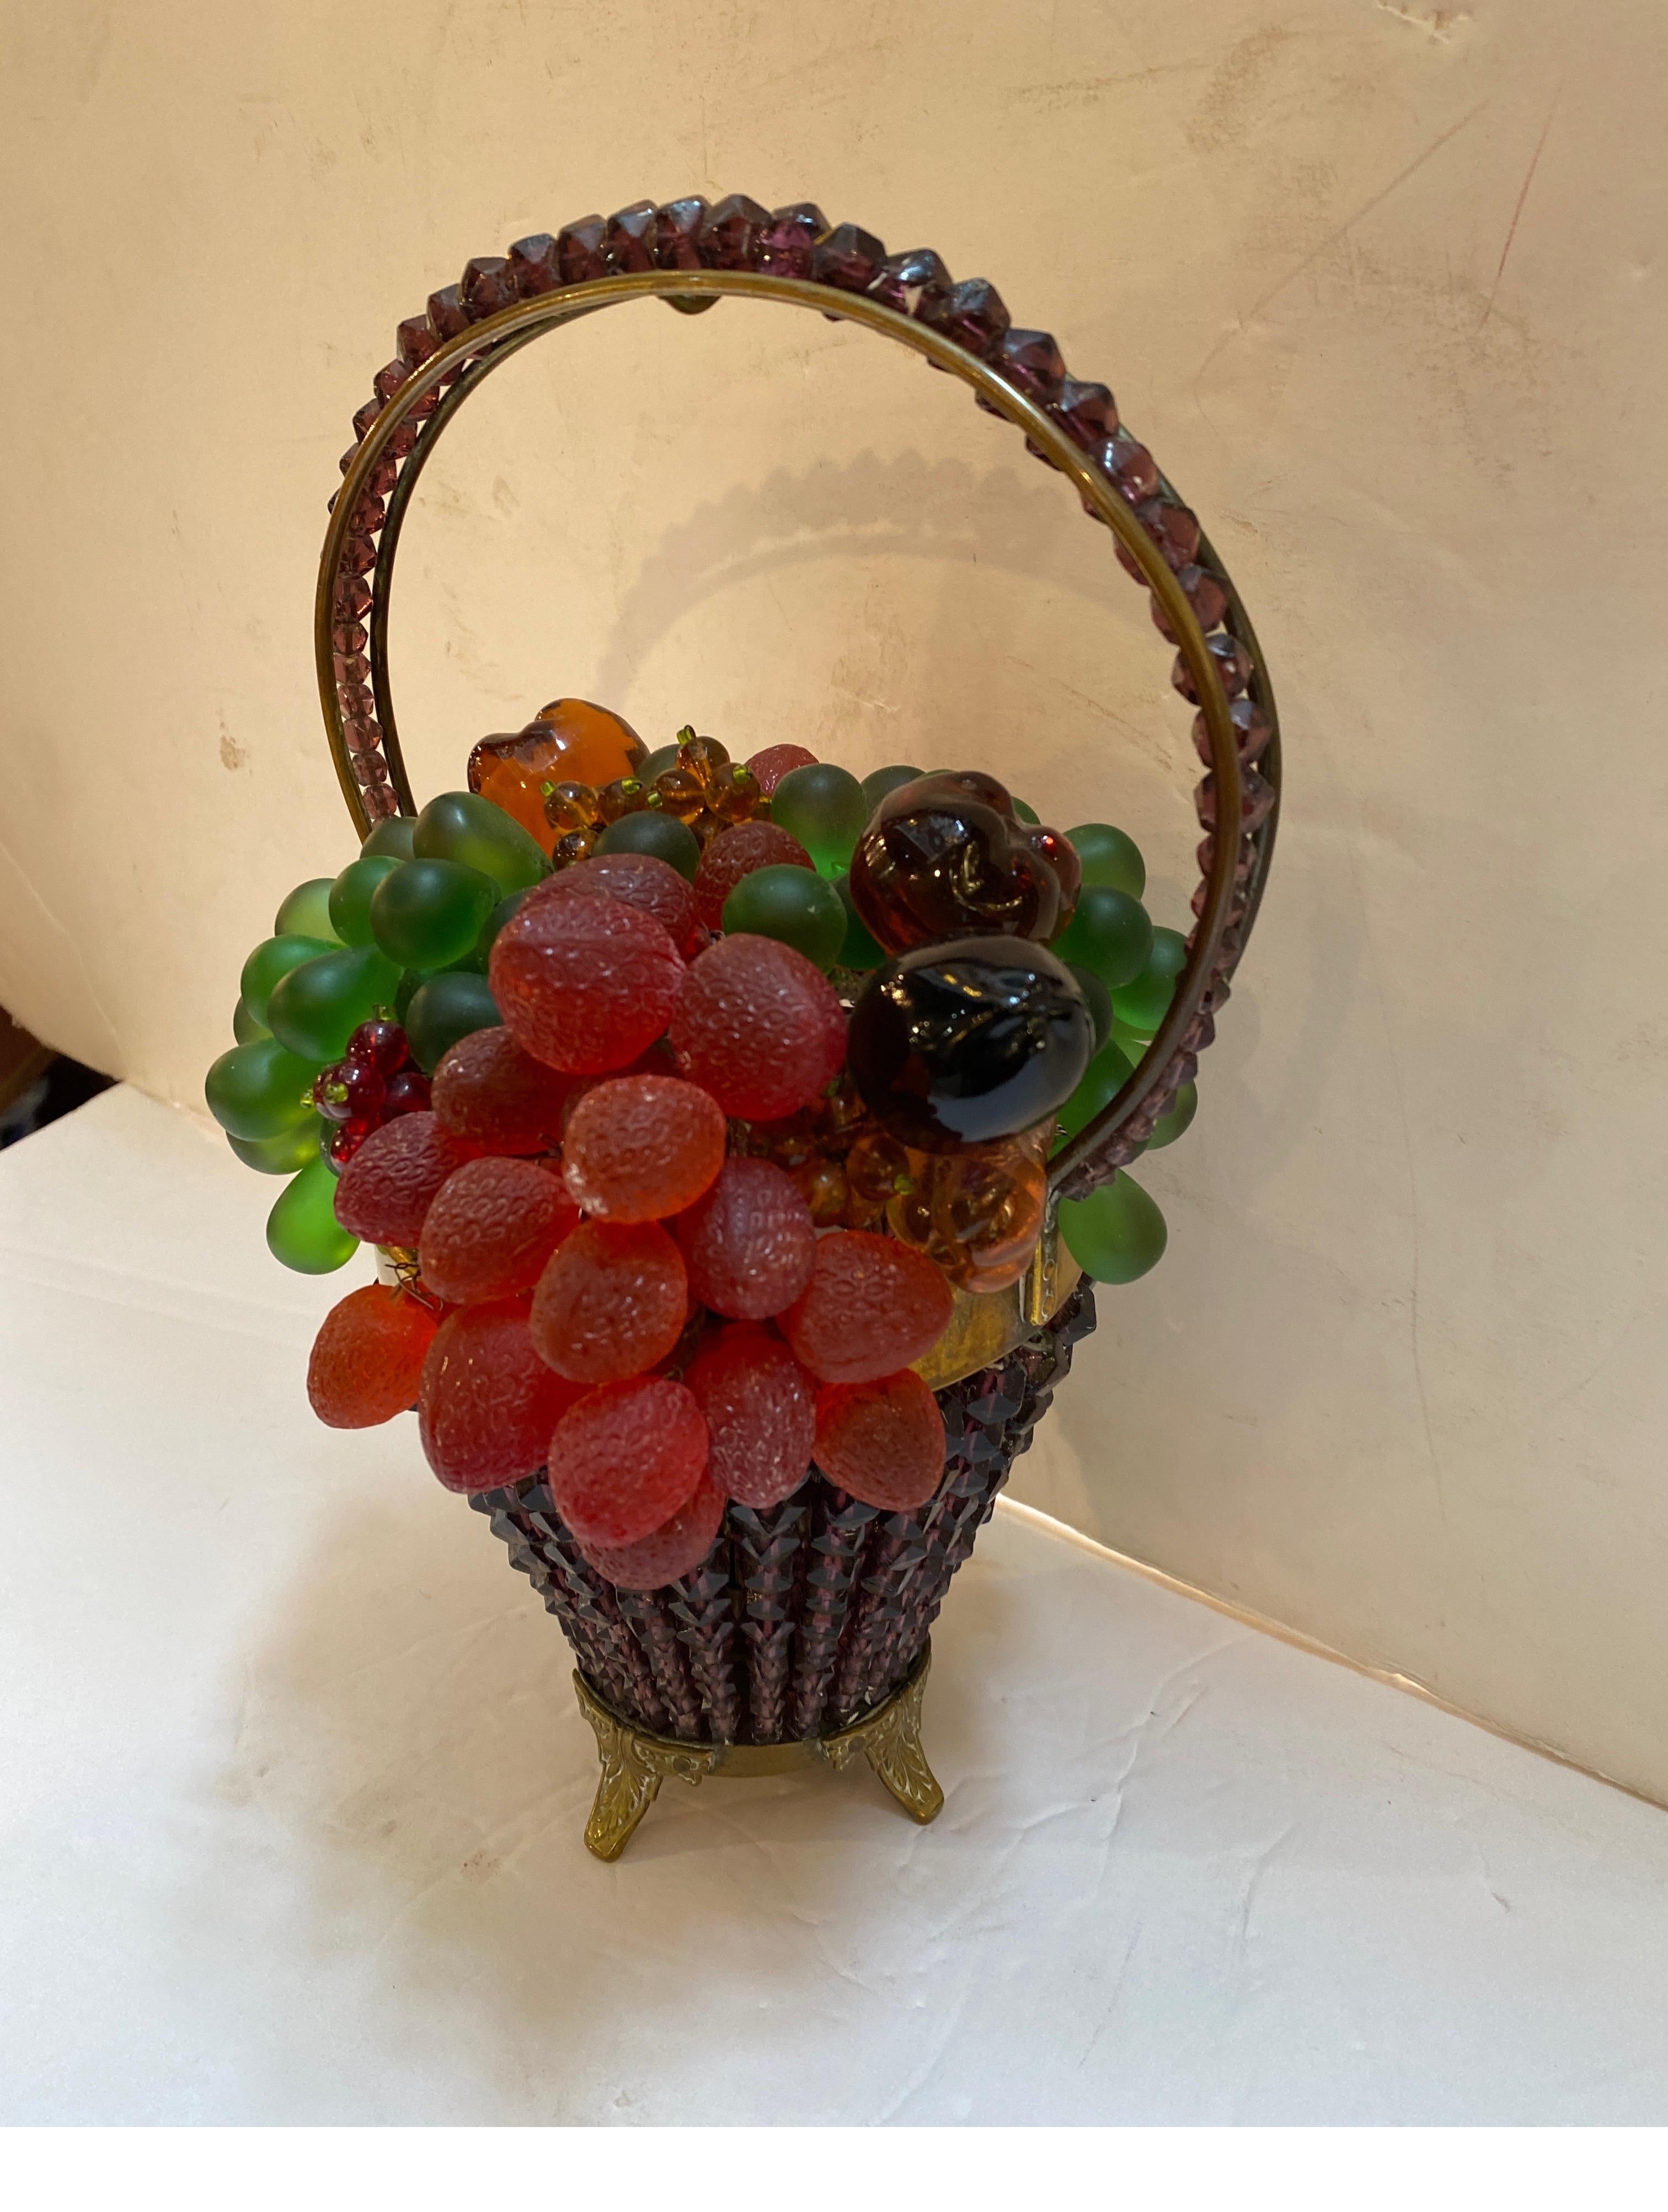 Early 20th Century Czech Glass Beaded Fruit Basket Form Lamp In Excellent Condition For Sale In Lambertville, NJ